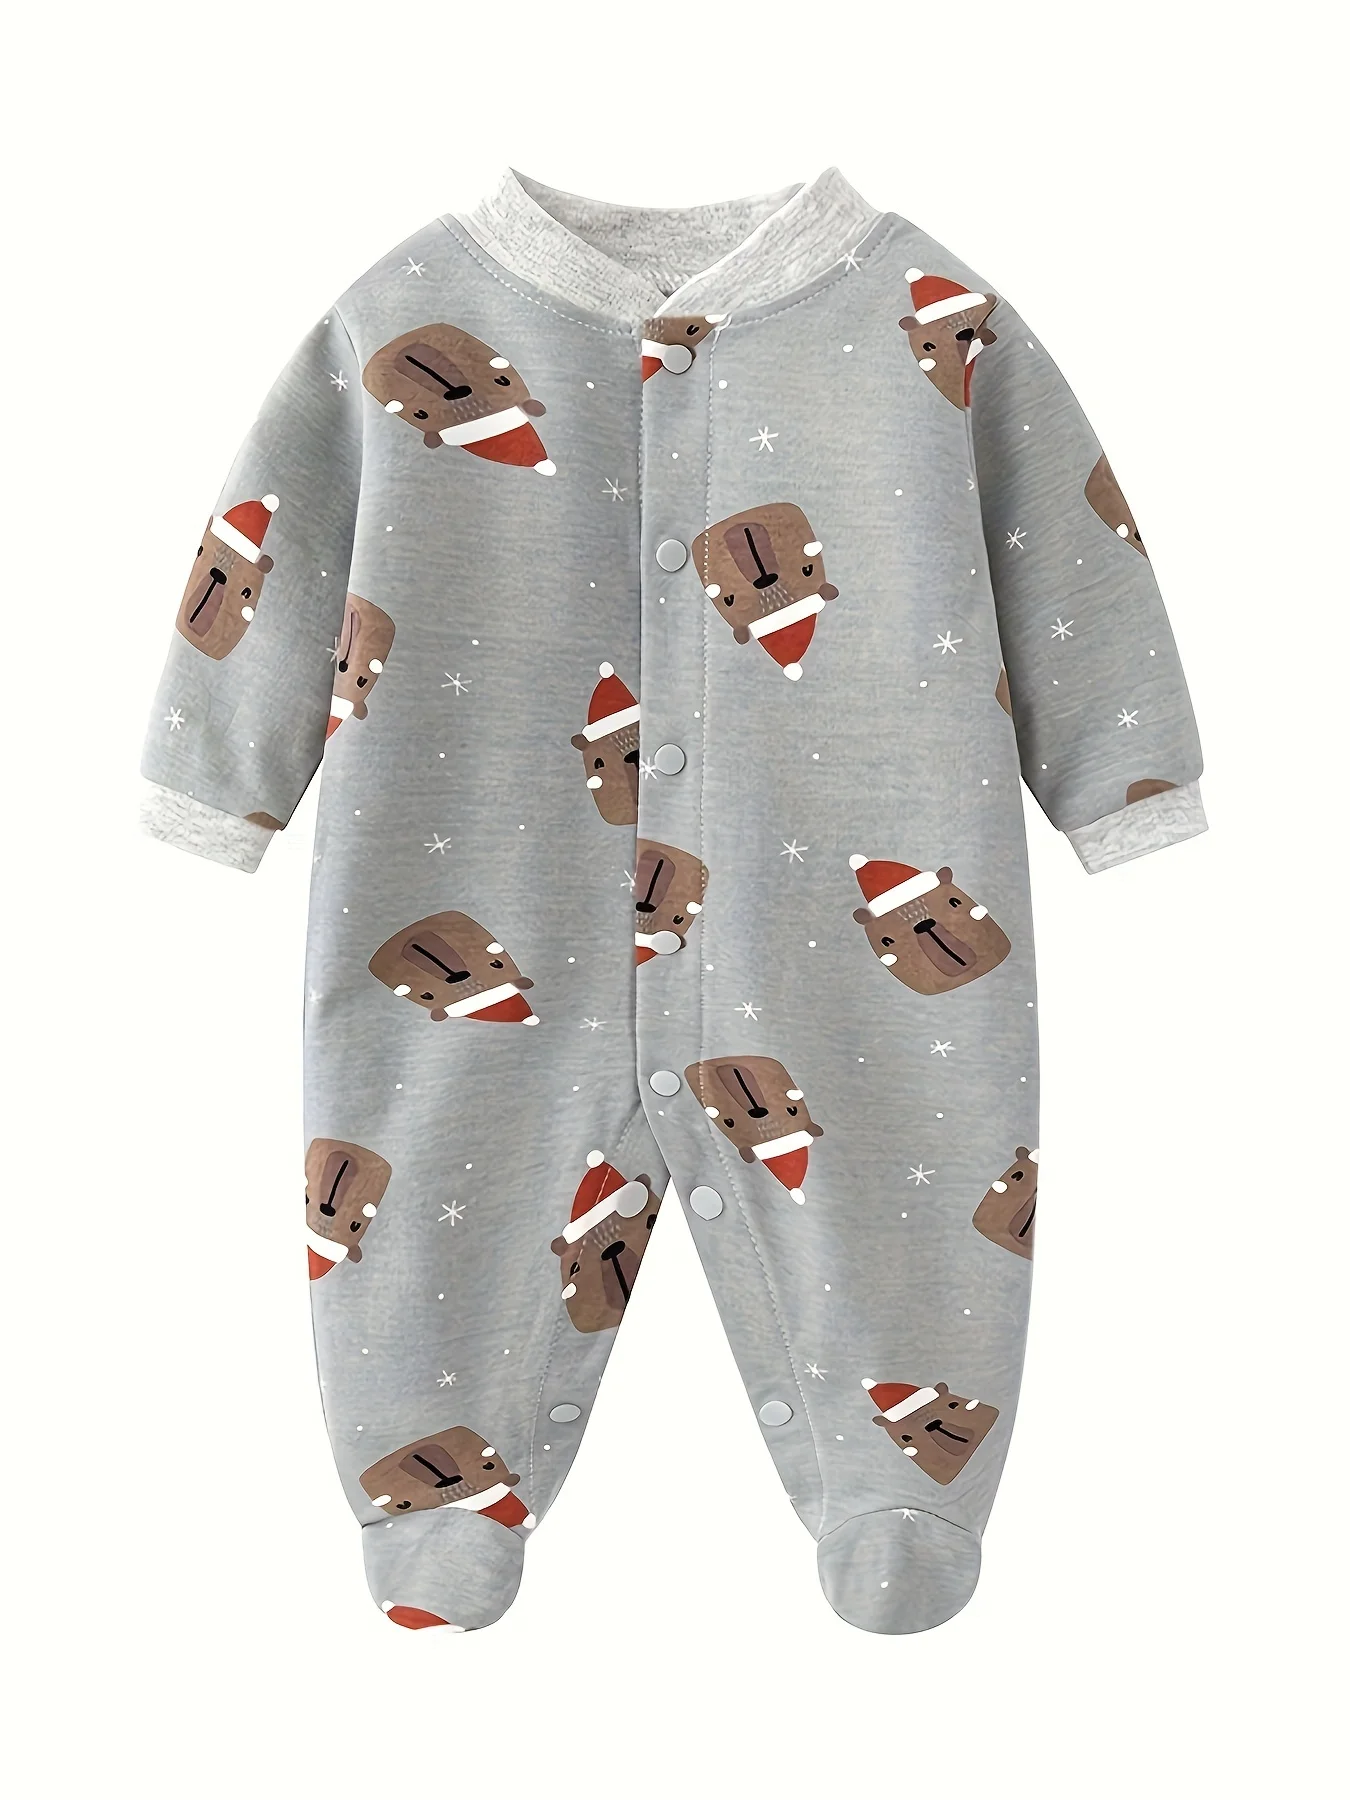 

Infant's Bodysui & One Piece Allover Print Bodysuit, Comfy Long Sleeve Onesie, Baby Boy's Clothing, As Gift